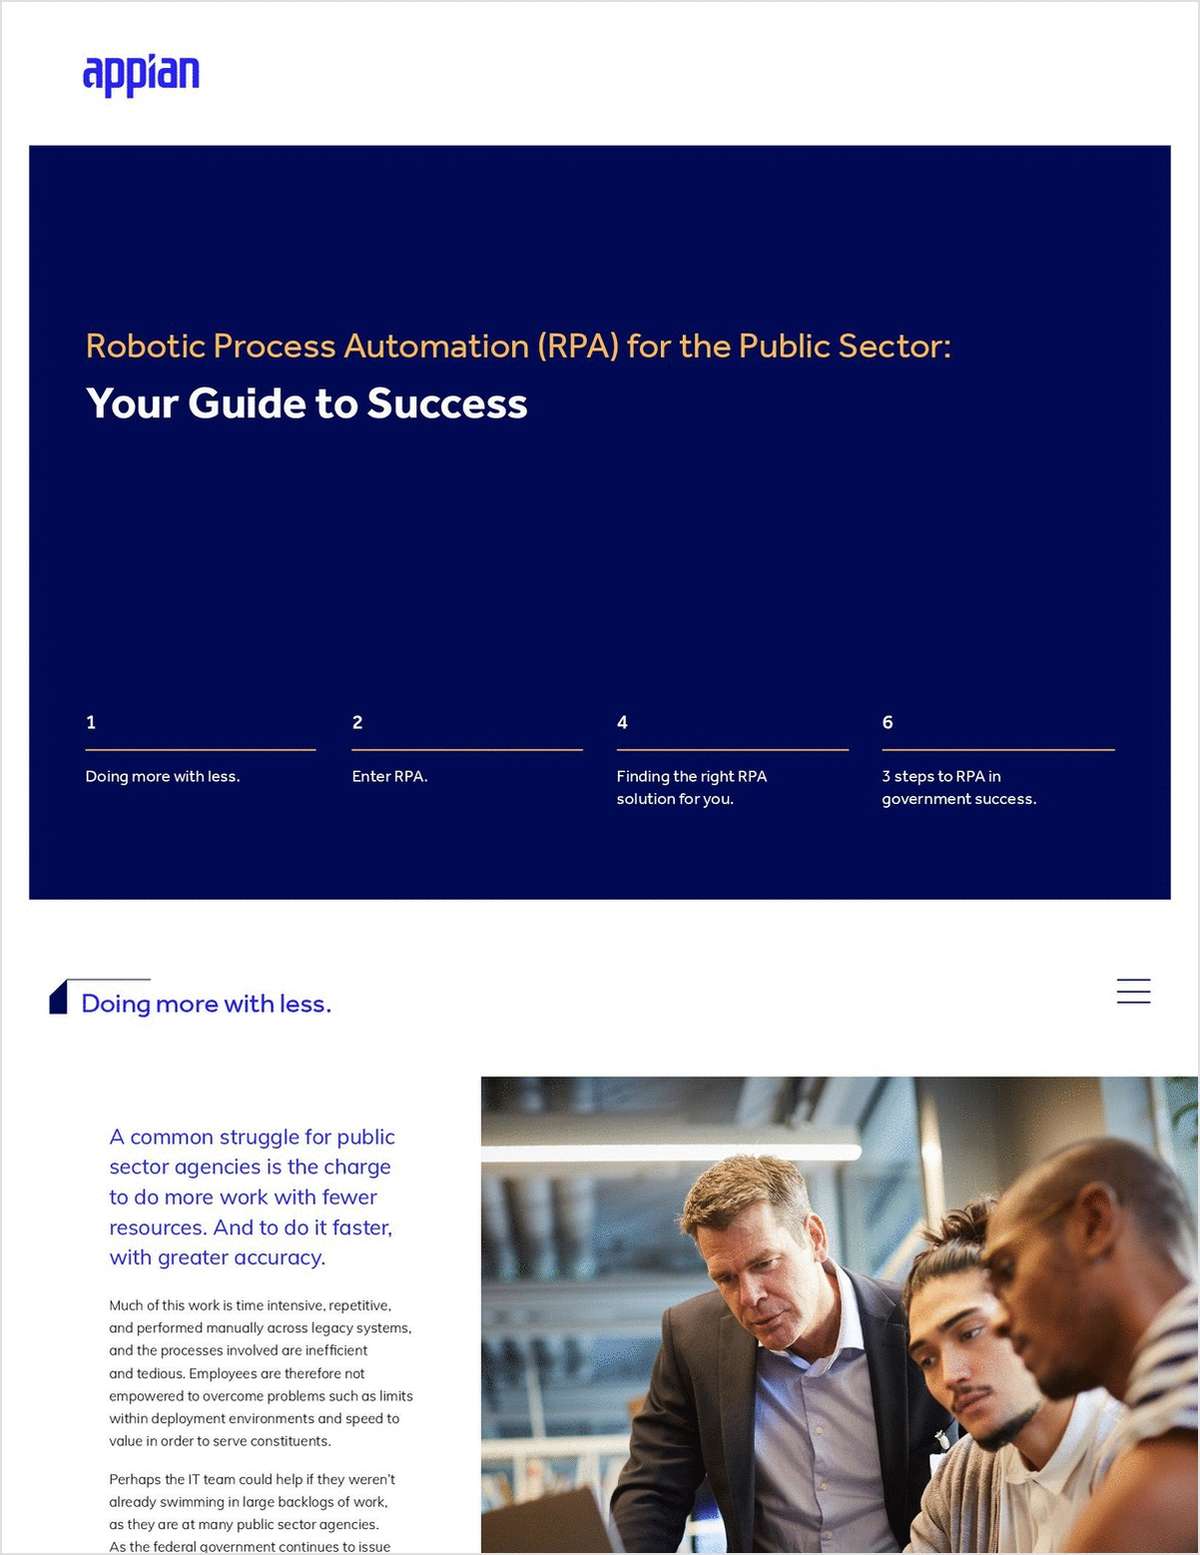 Robotic Process Automation (RPA) for the Public Sector: Your Guide to Success